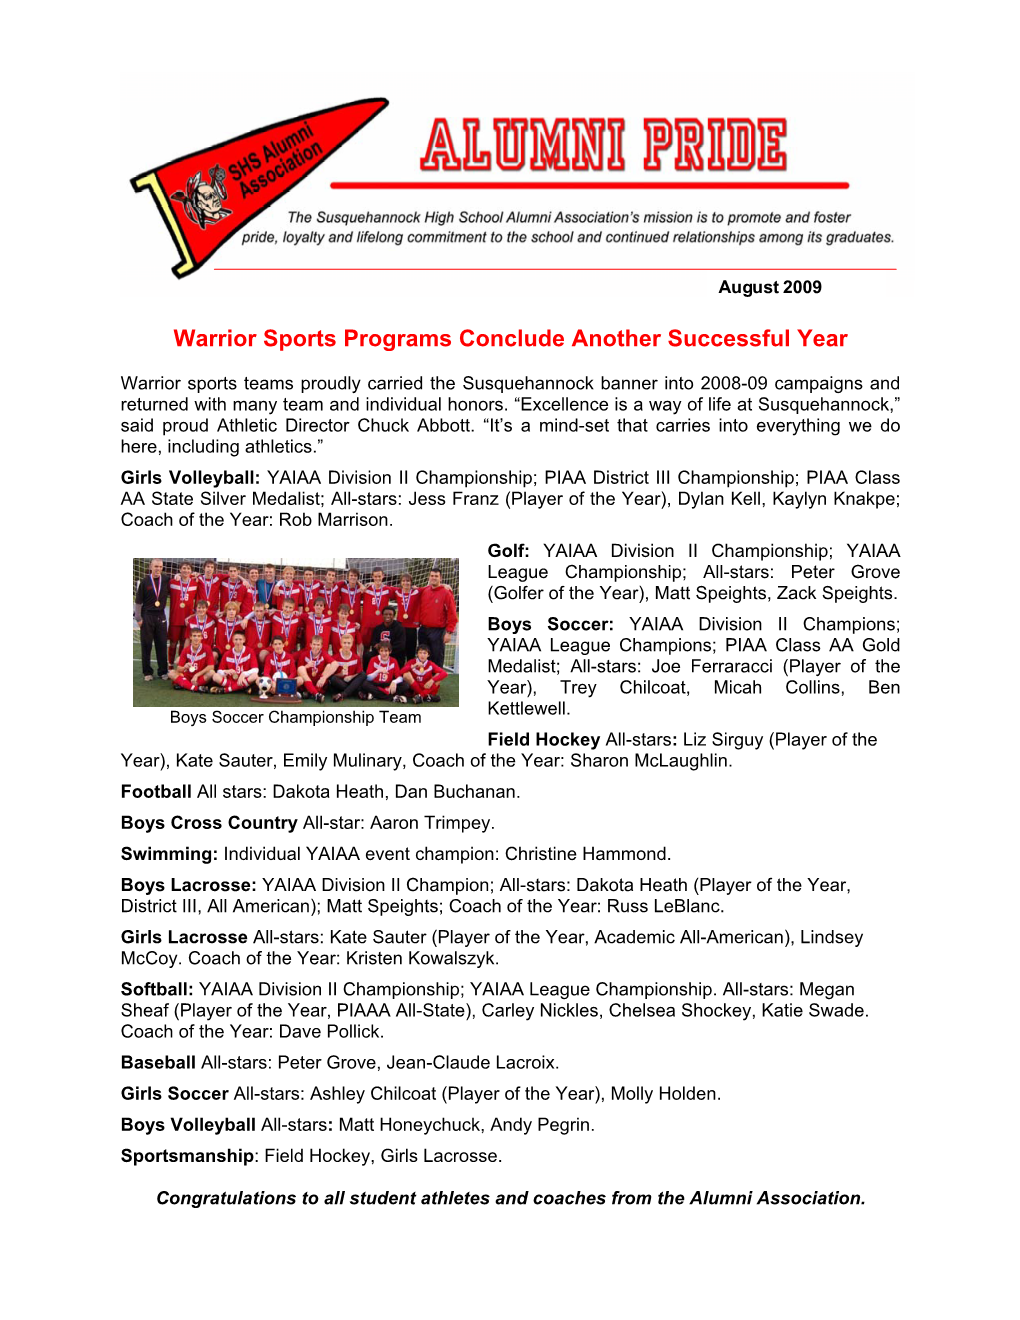 Warrior Sports Programs Conclude Another Successful Year